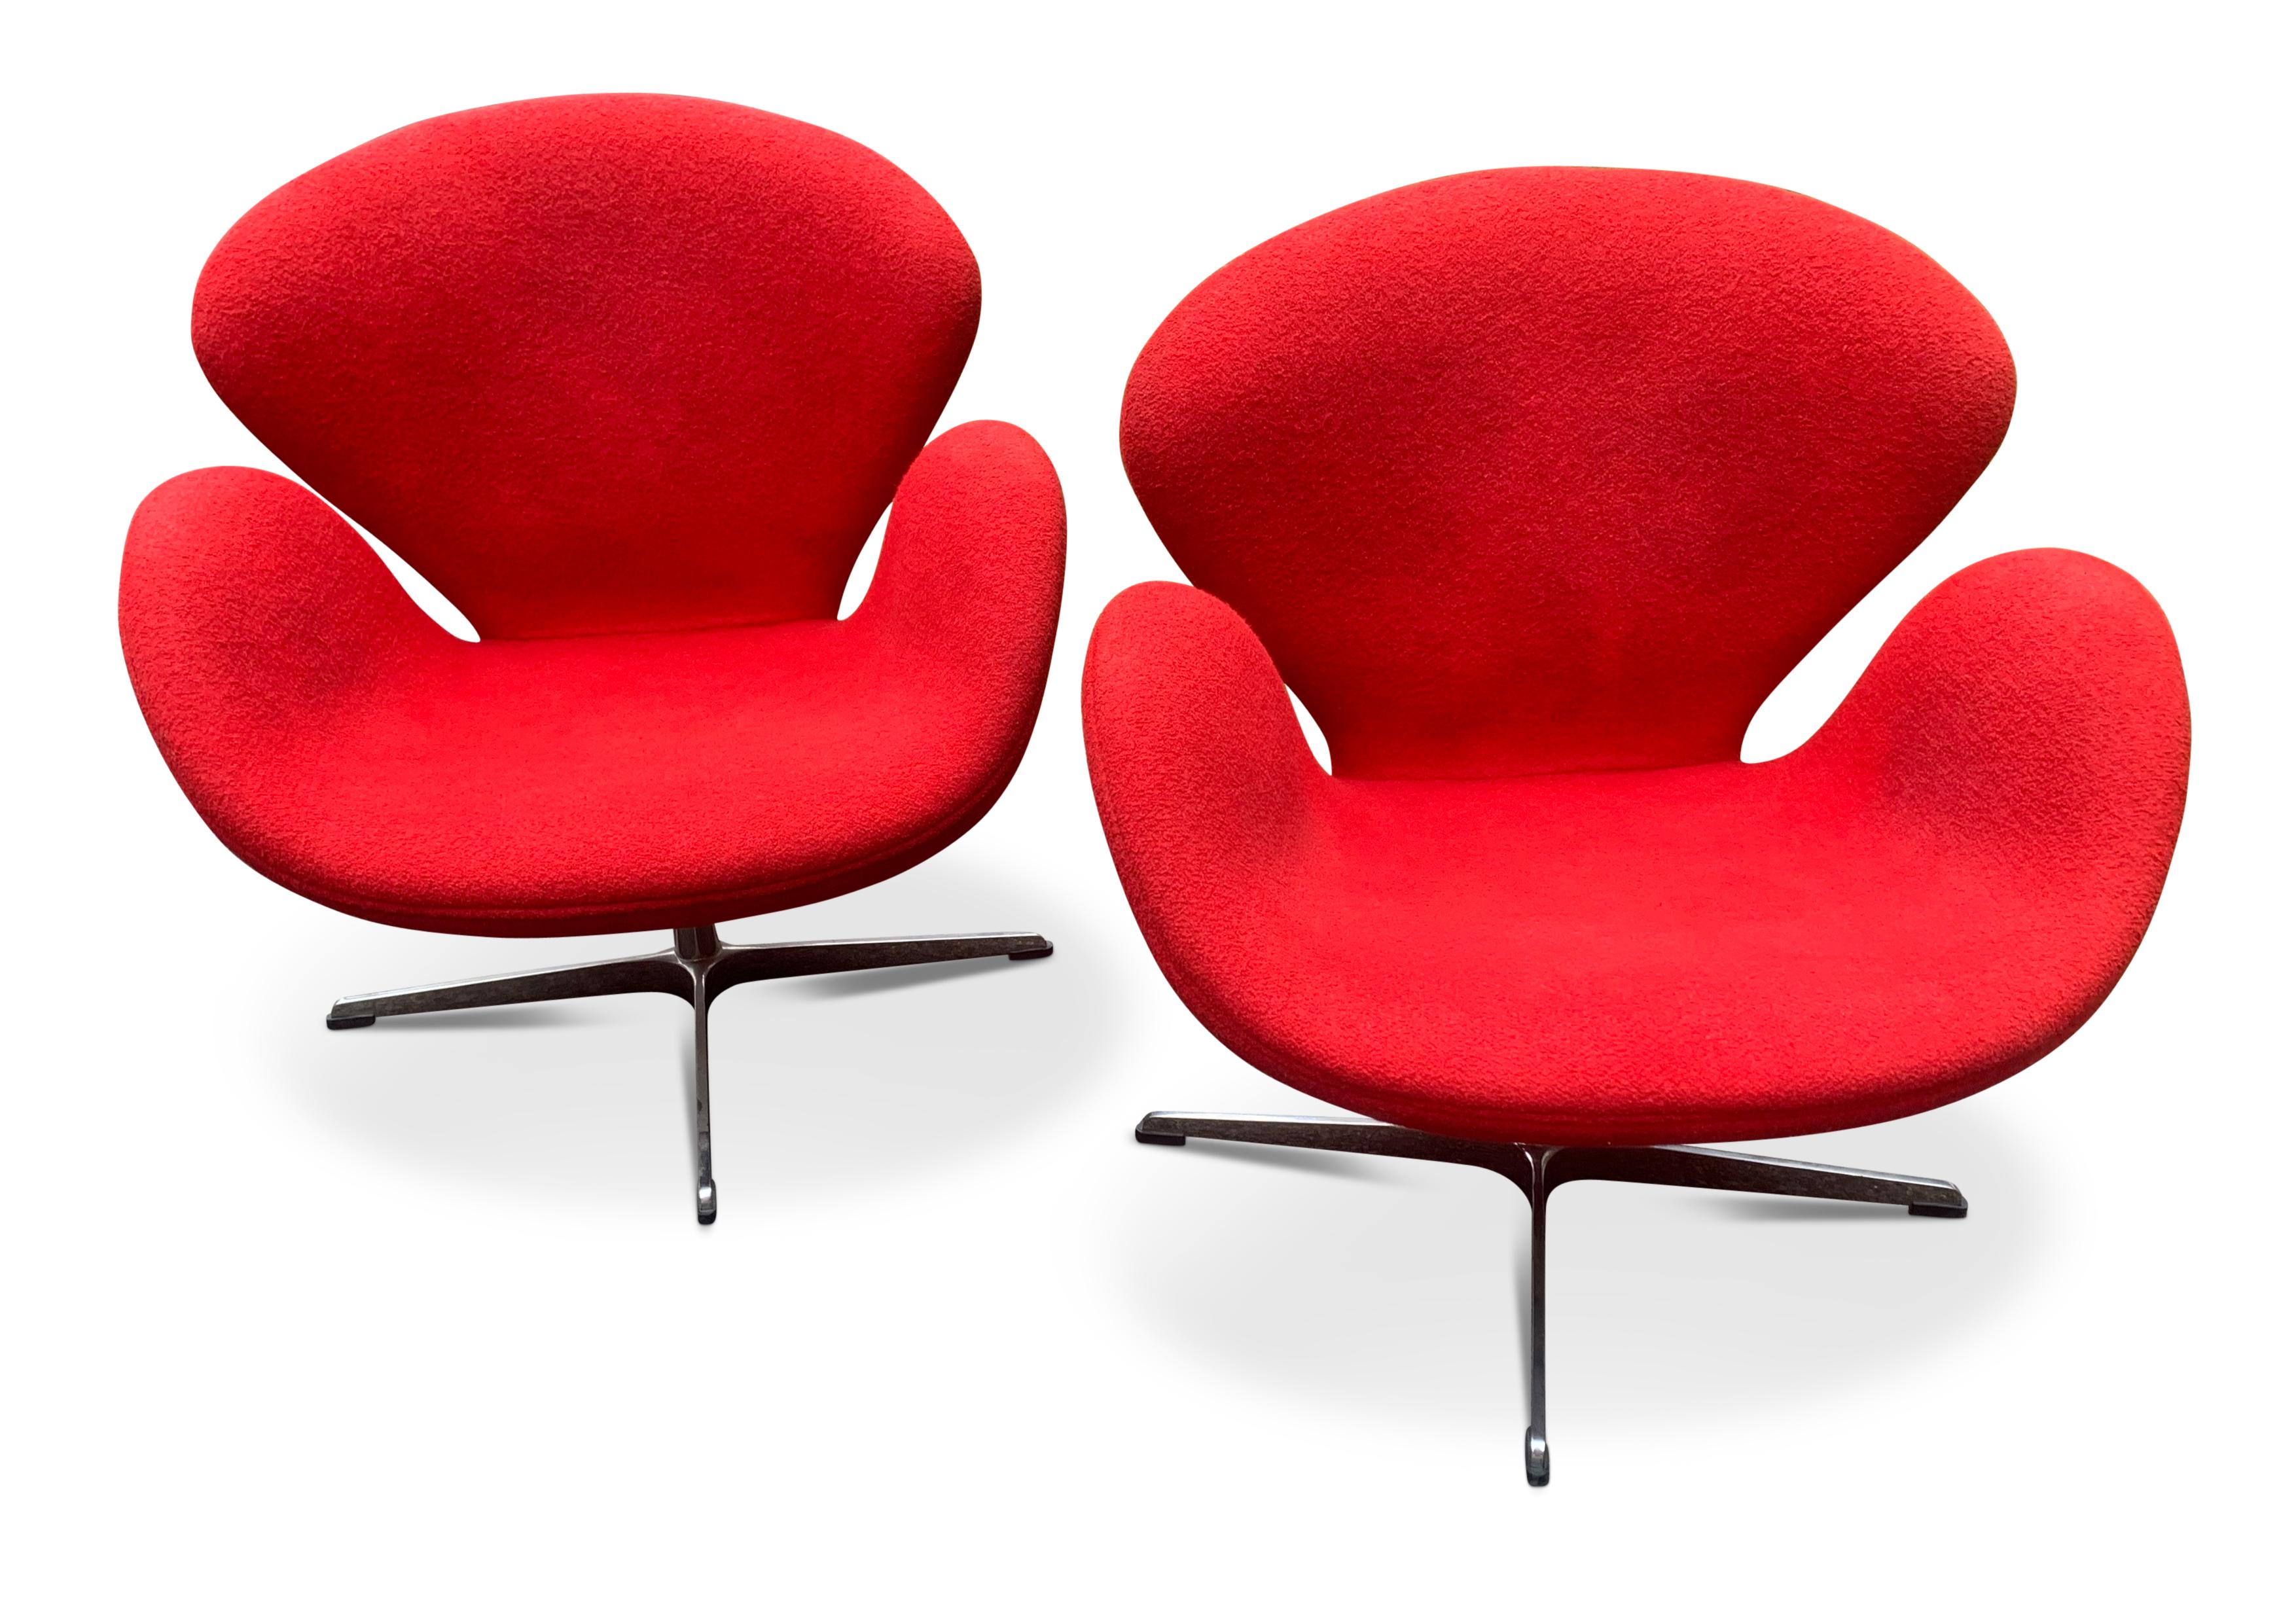 Arne Jacobsen Swan Chair (no labels) in Red Upholstery on a Four Star Metal Base 
Arne Emil Jacobsen, usually known as Arne Jacobsen, (11 February 1902 to 24 March 1971) was one of Denmark’s most successful architects and designers. In particular,